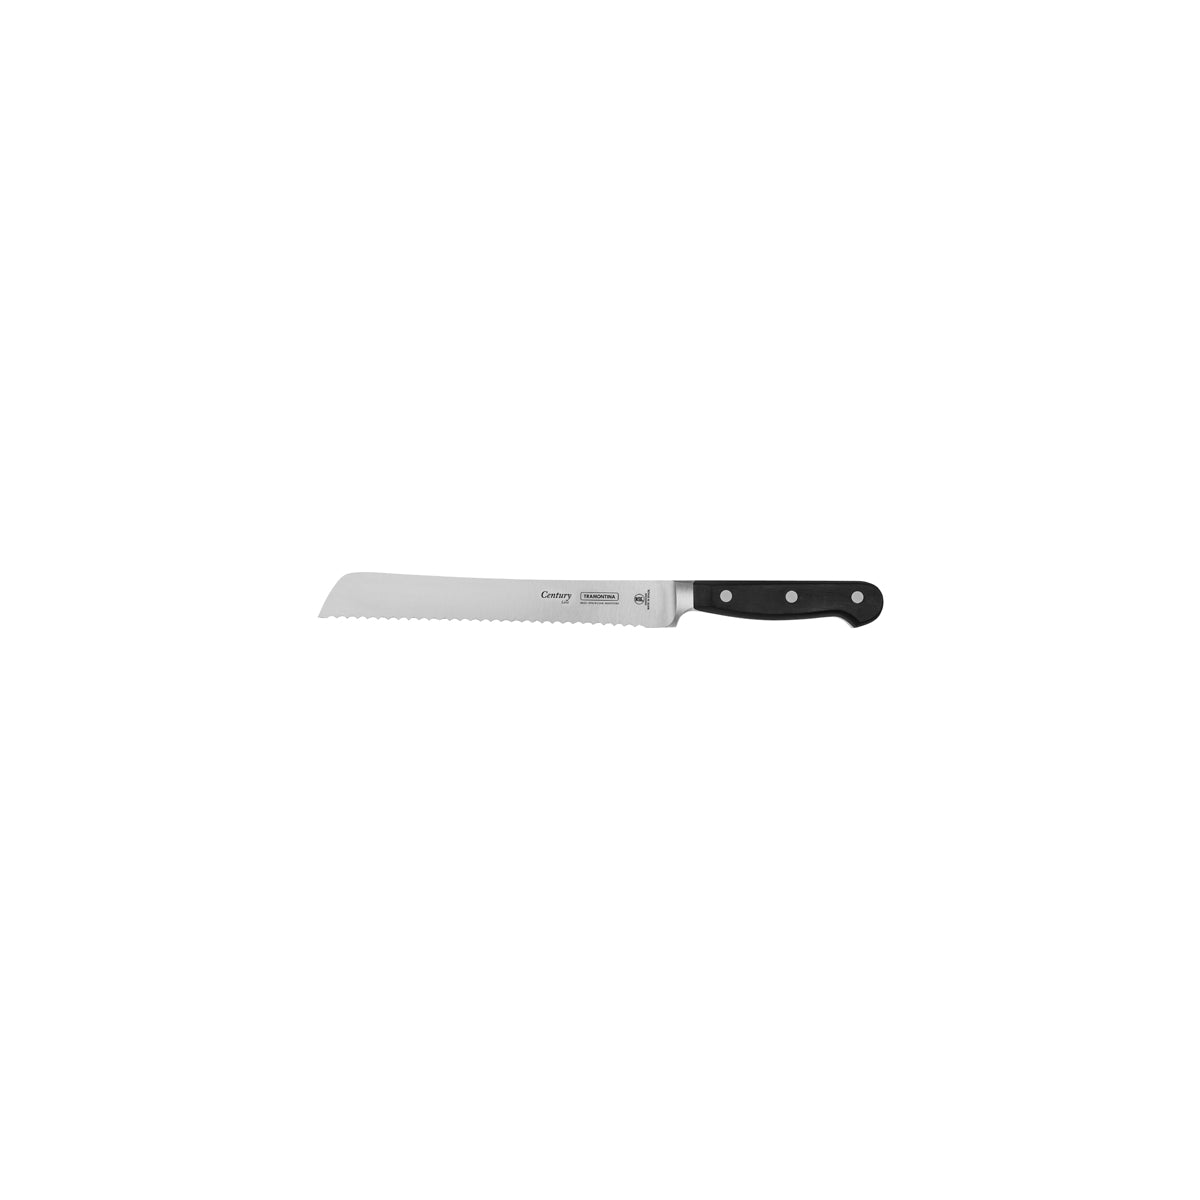 TM24009/108 Tramontina Century Bread Knife Serrated Blade with Forged Handle Black 203mm Tomkin Australia Hospitality Supplies